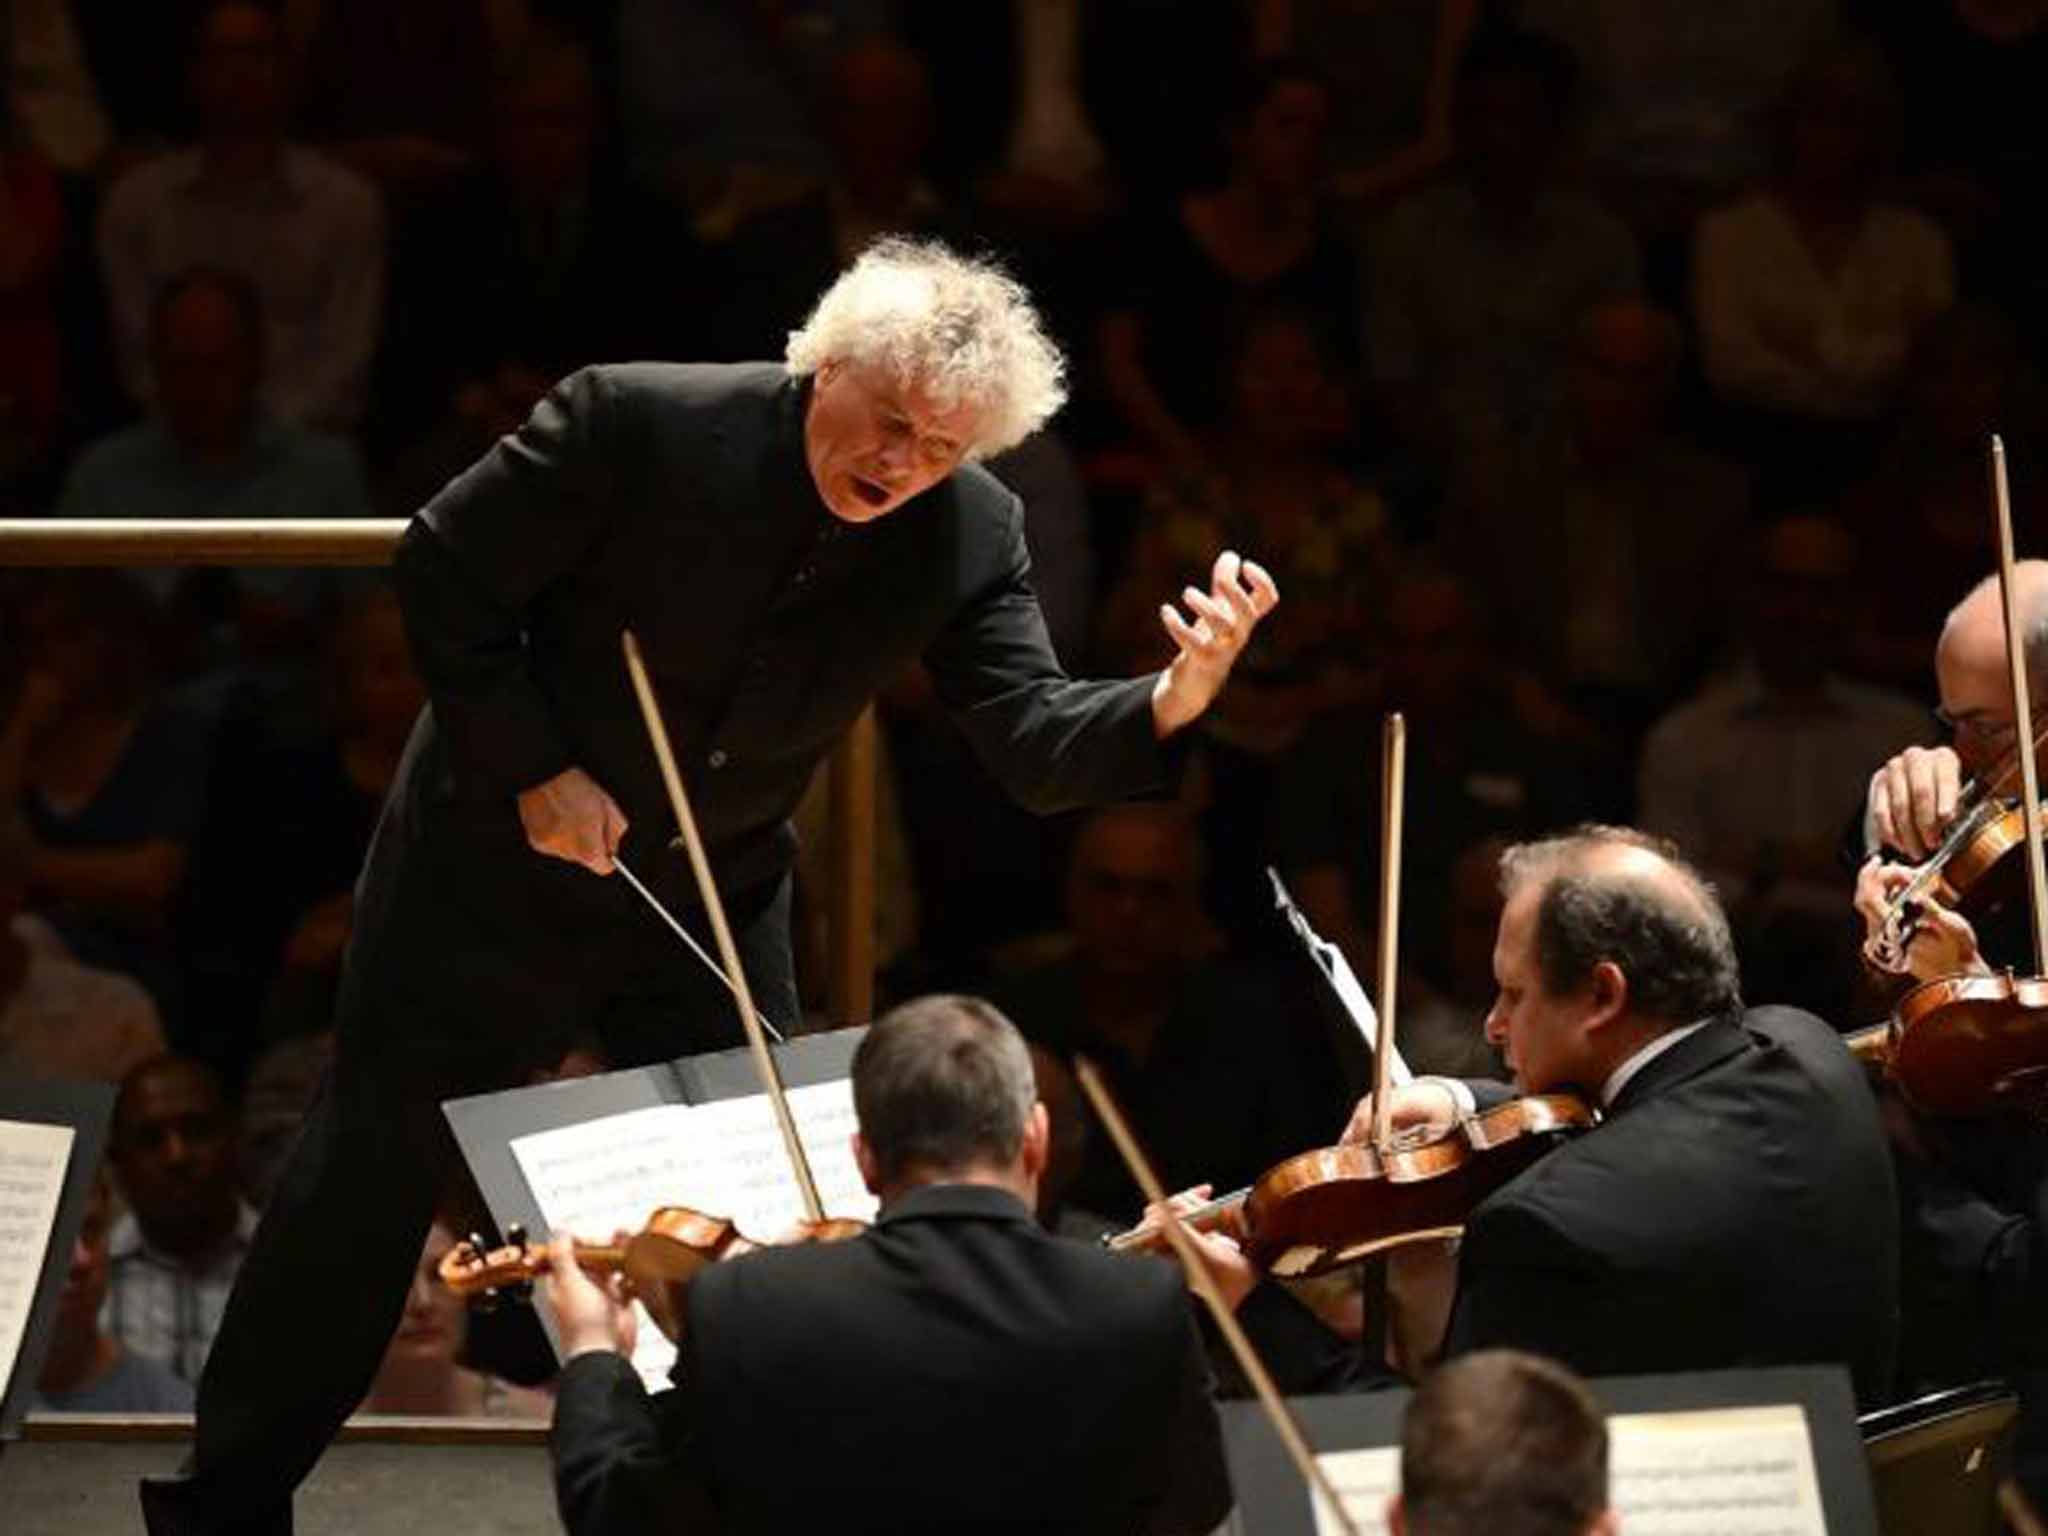 Just his forte: Sir Simon Rattle with the LSO